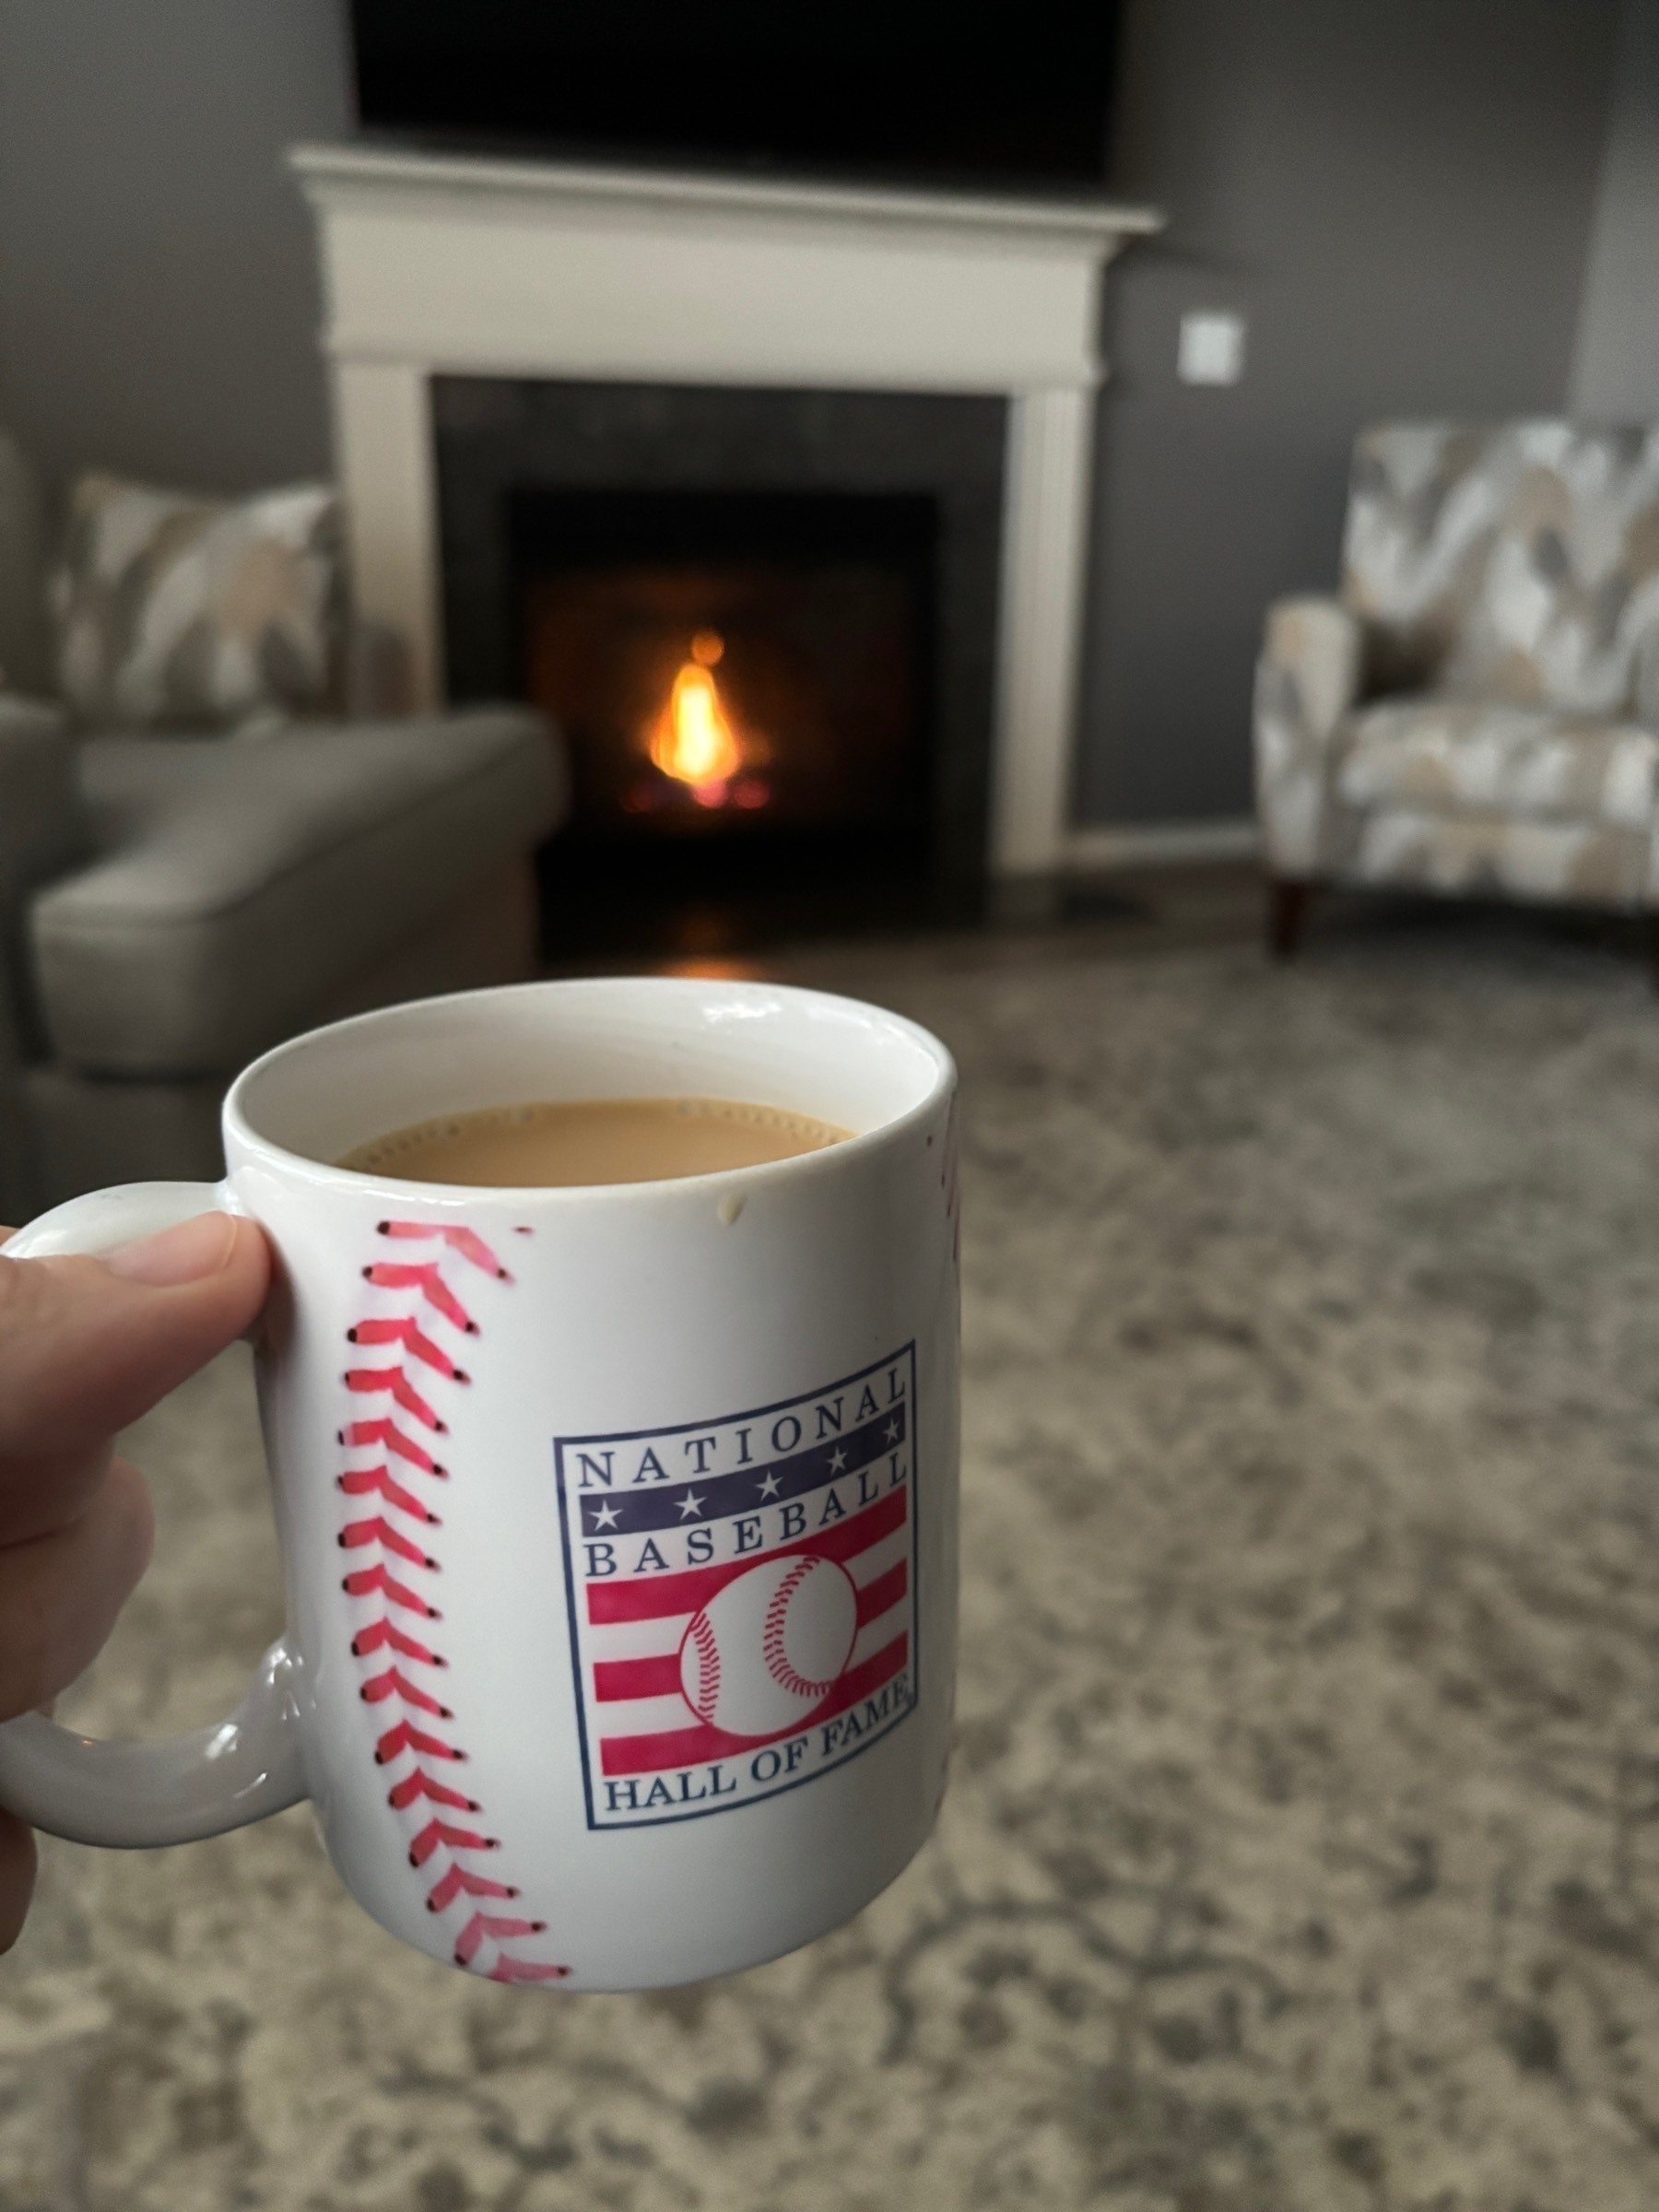 A national baseball hall of fame coffee mug filled with glorious Guatemalan coffee in front of a fireplace. 